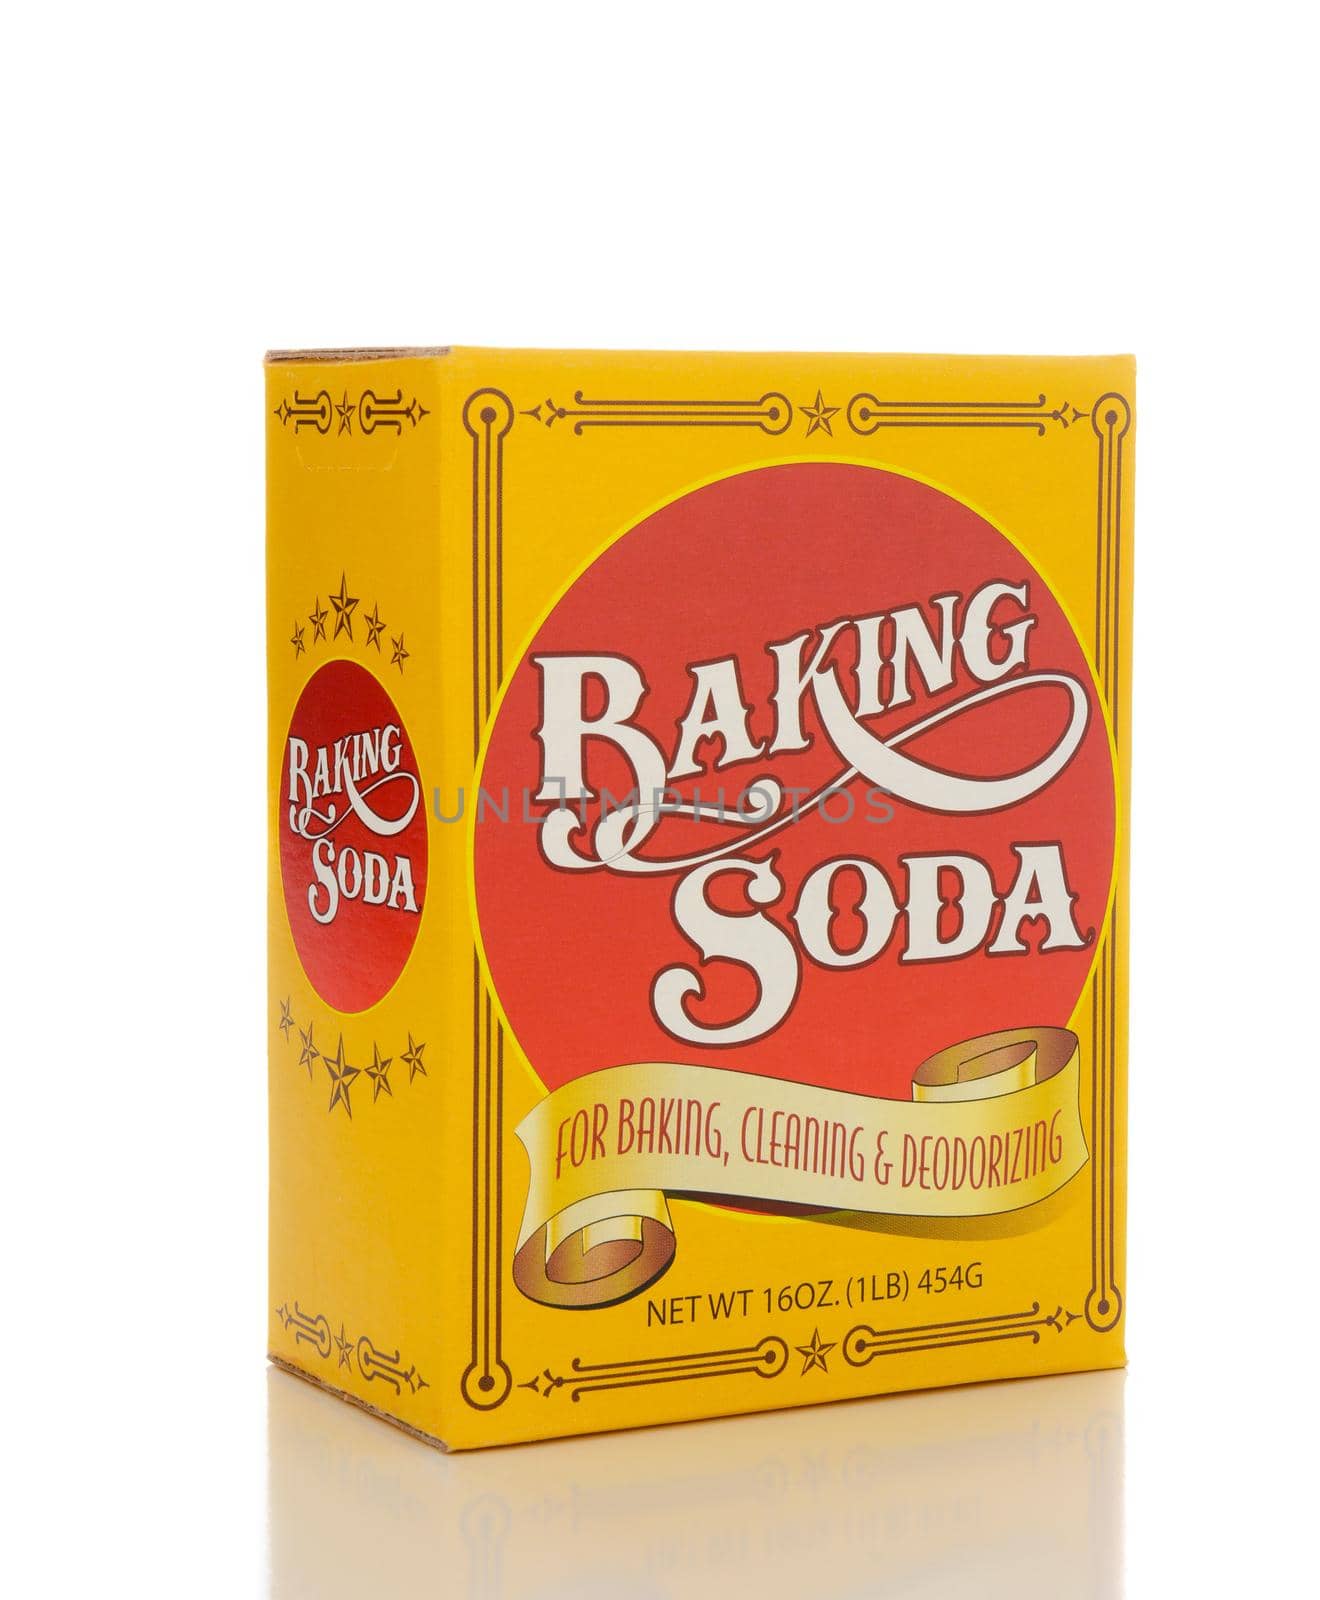 IRVINE, CA - JANUARY 23, 2015: A box of Baking Soda. The sodium bicarbonate is distributed by Greenbrier International is used for baking, cleaning and deodorizing.